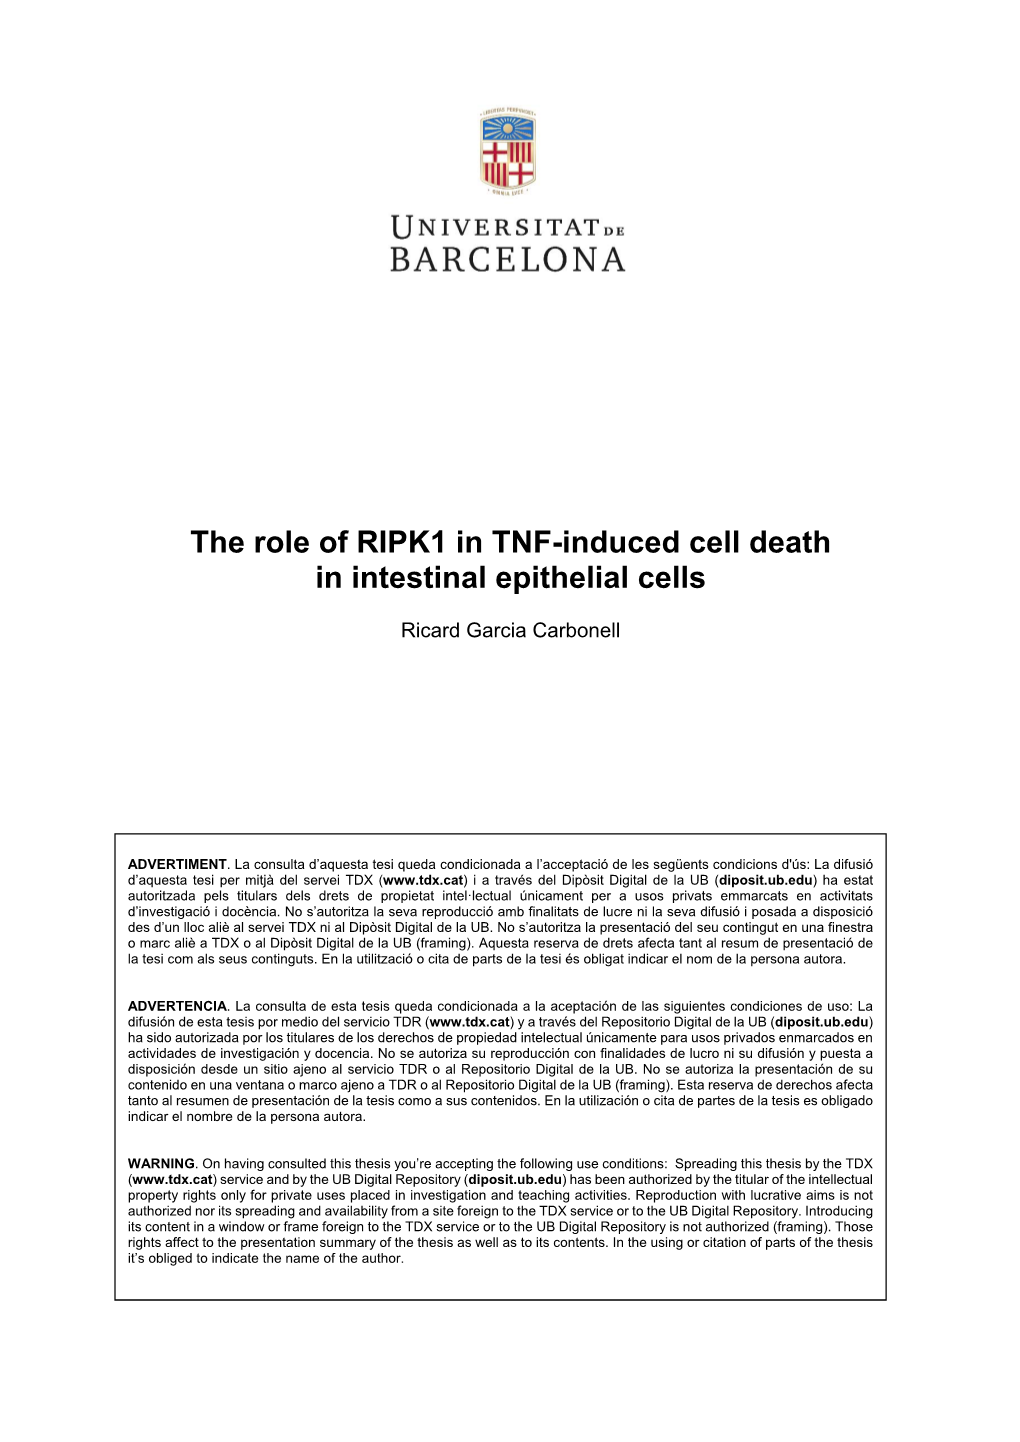 The Role of RIPK1 in TNF-Induced Cell Death in Intestinal Epithelial Cells